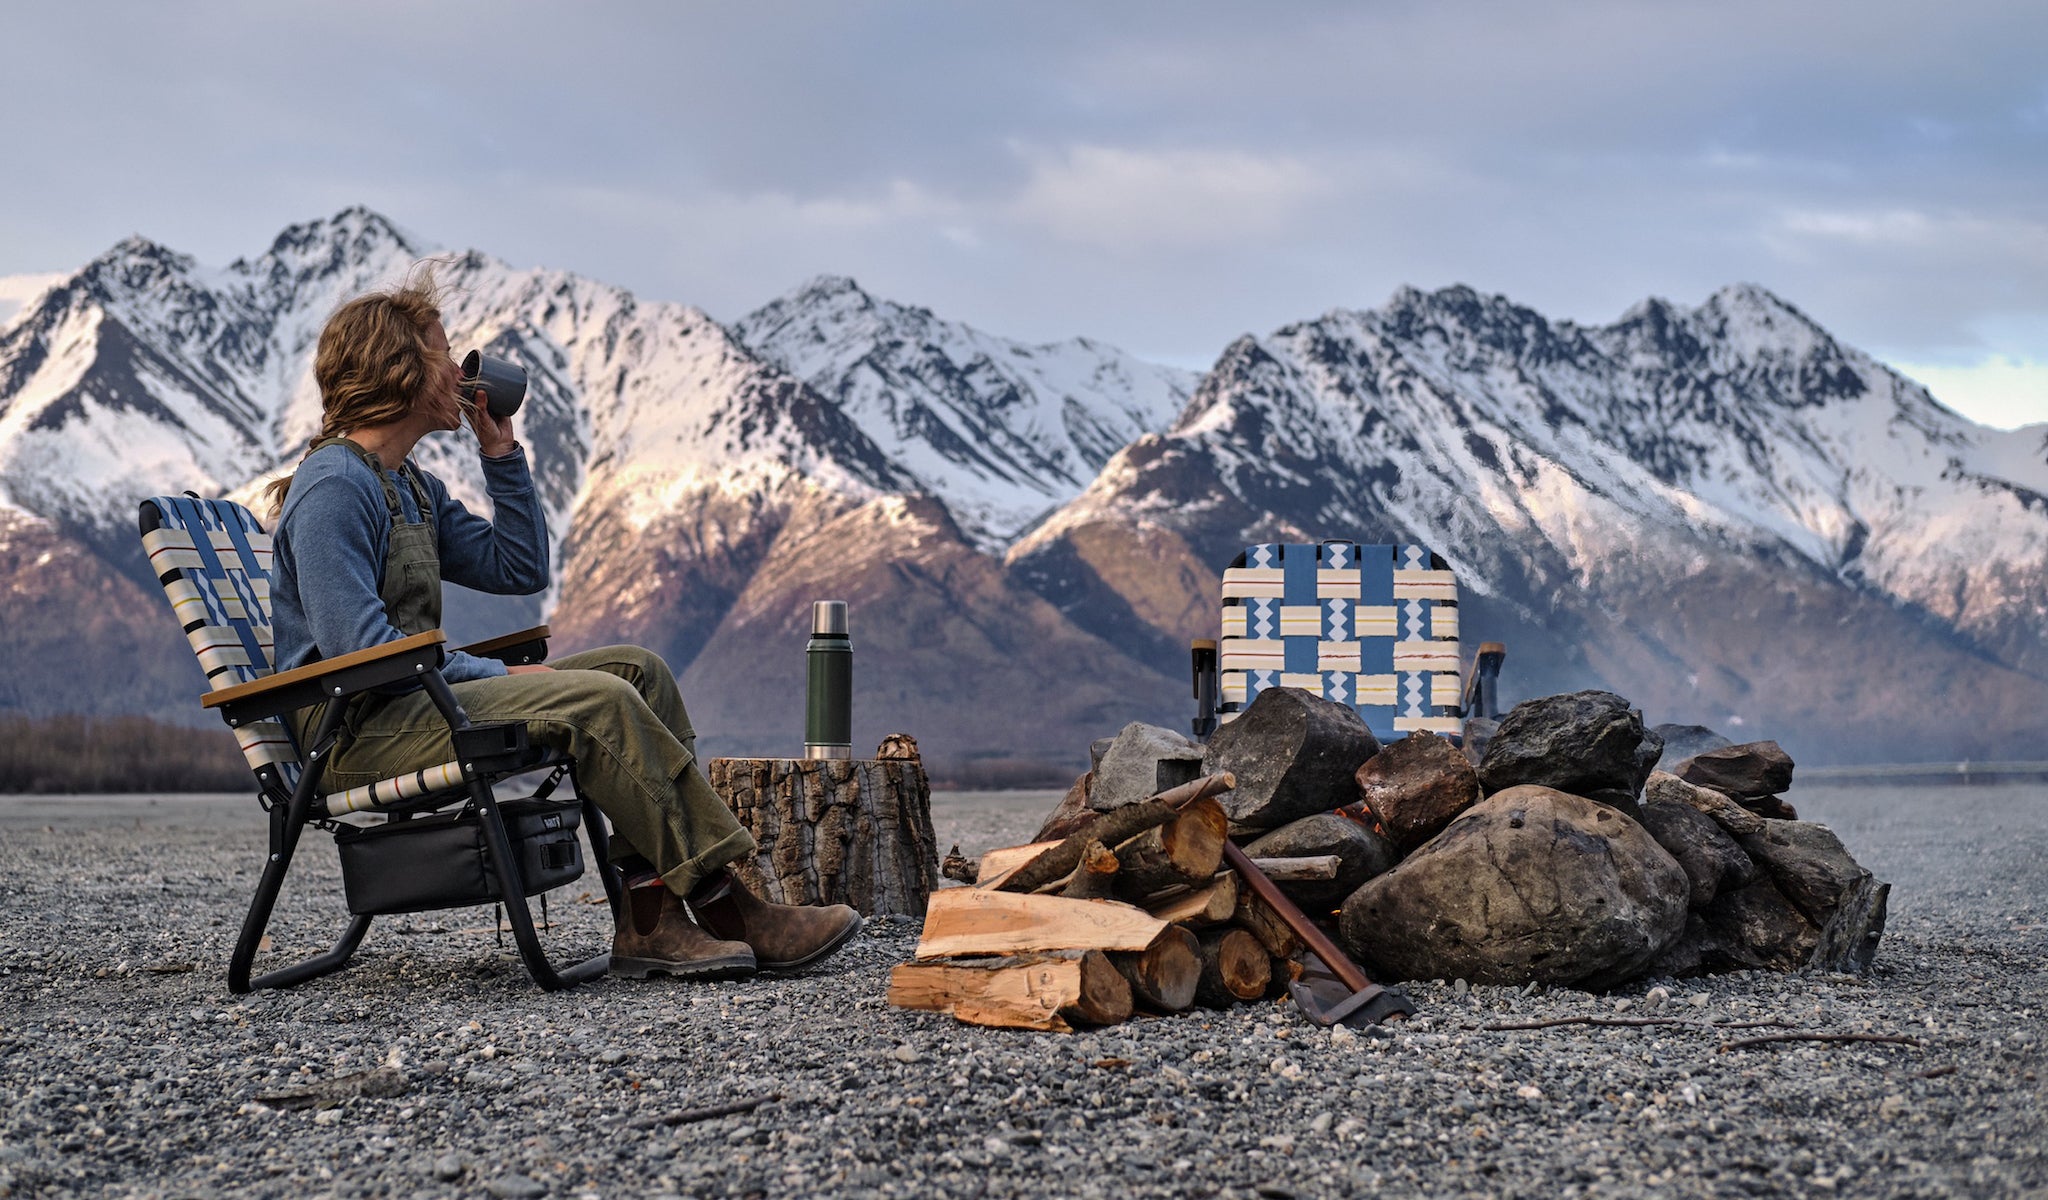 Women Sitting in PARKIT voyager outdoor chair in Alaska with a beautiful mountain beackground and the makings of a campfire in the foreground. She is drinking from a canteen while sitting in the chair.